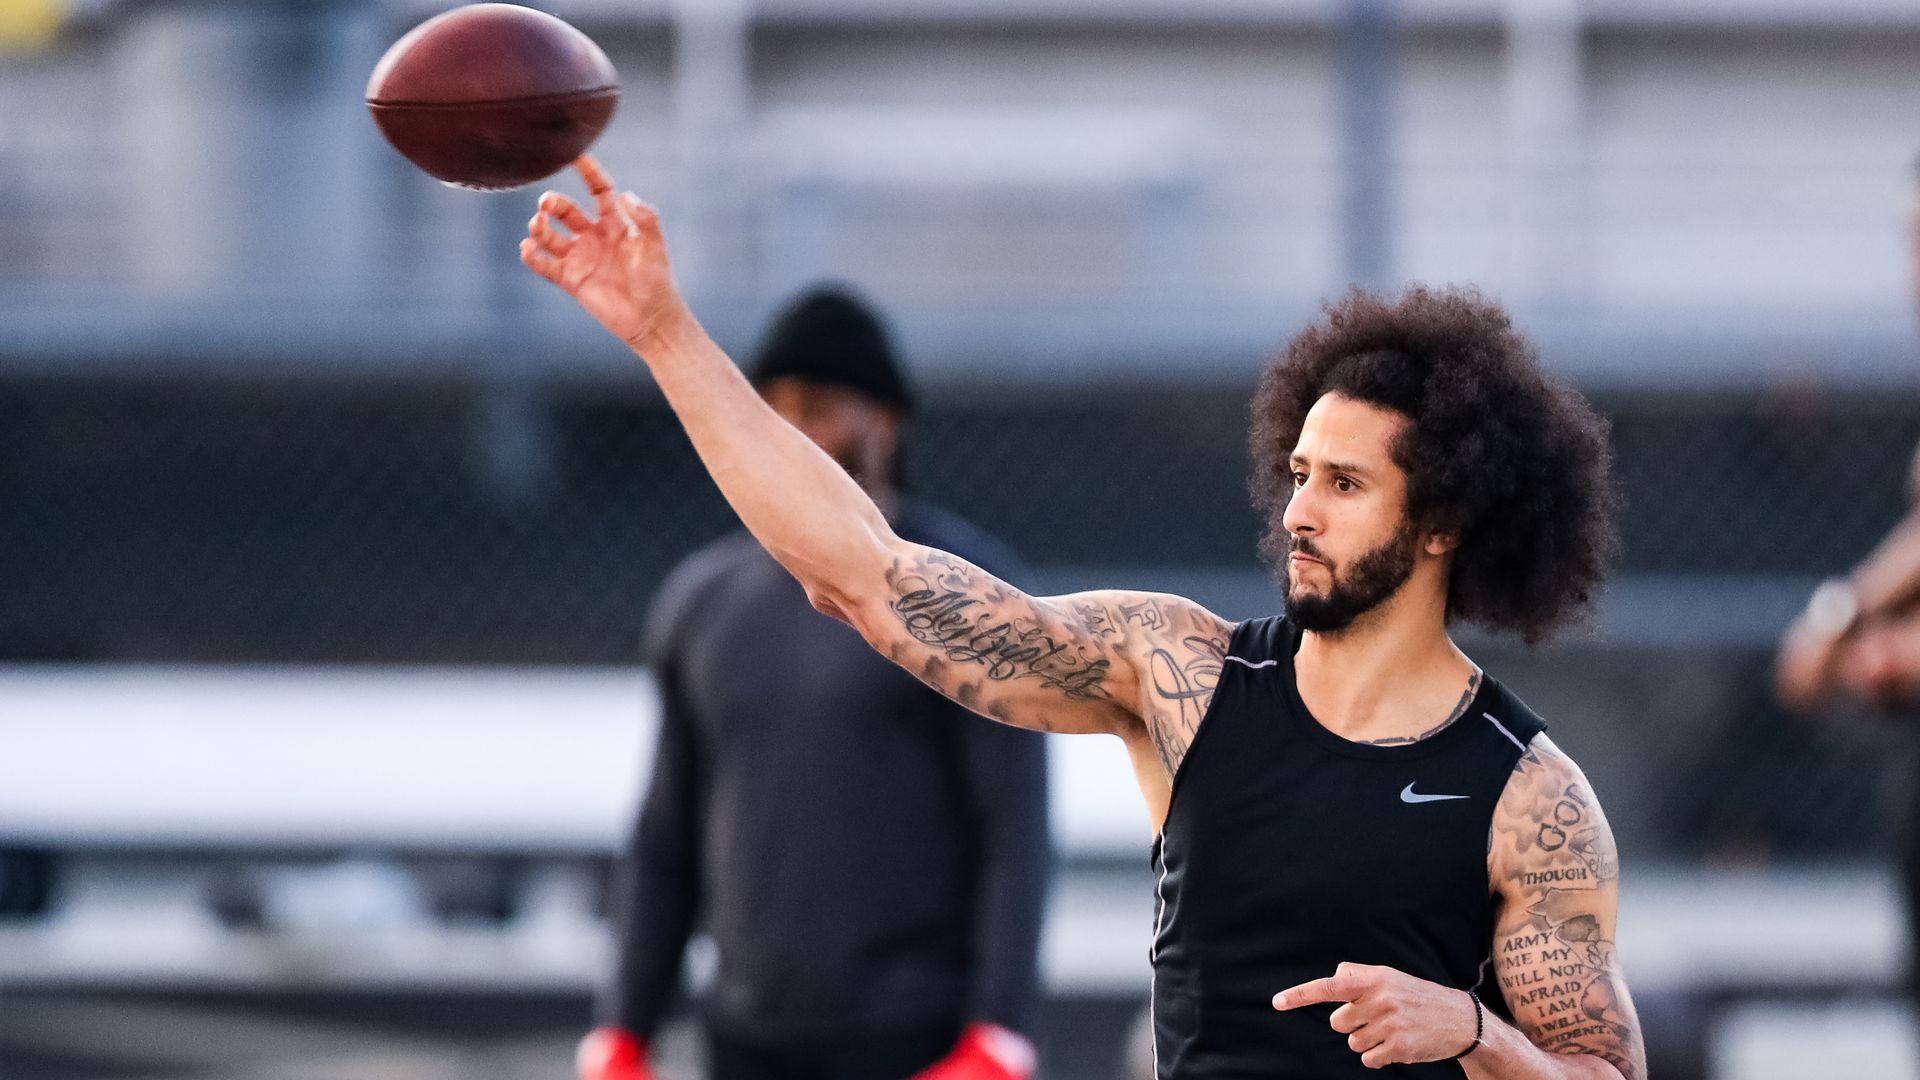 In this image, Colin Kaepernick tosses a football on a football field 